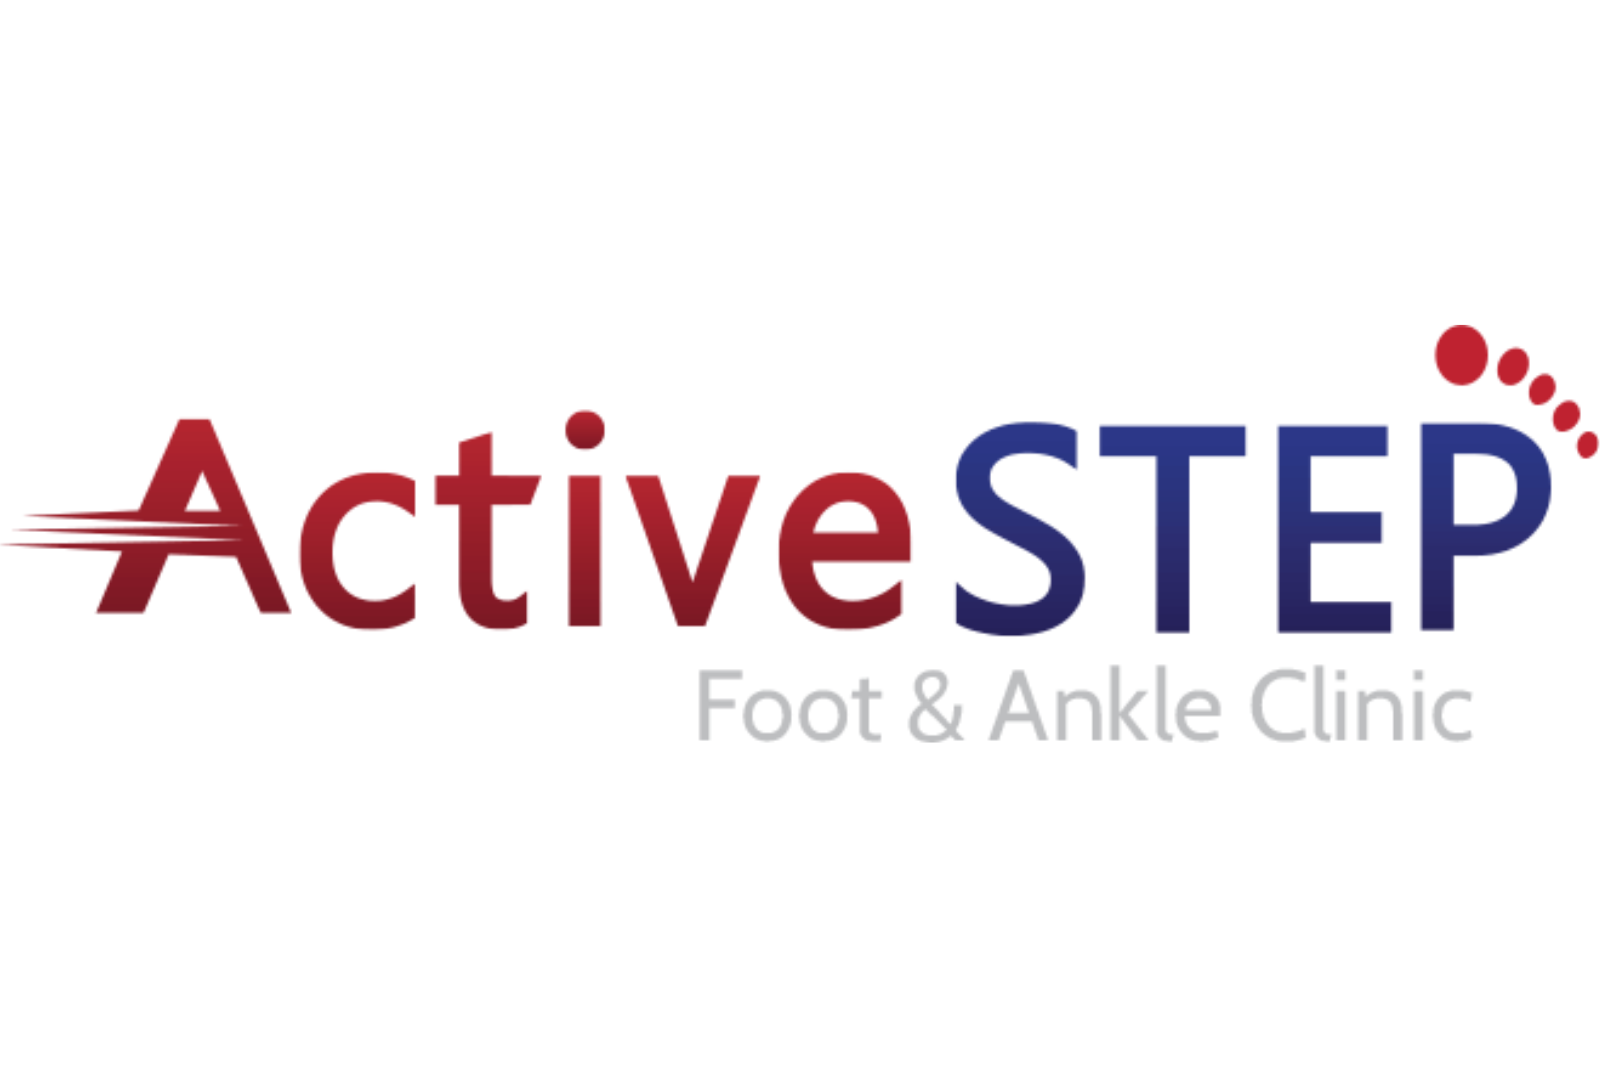 Active Step Foot & Ankle Clinic - New Position for Podiatrist